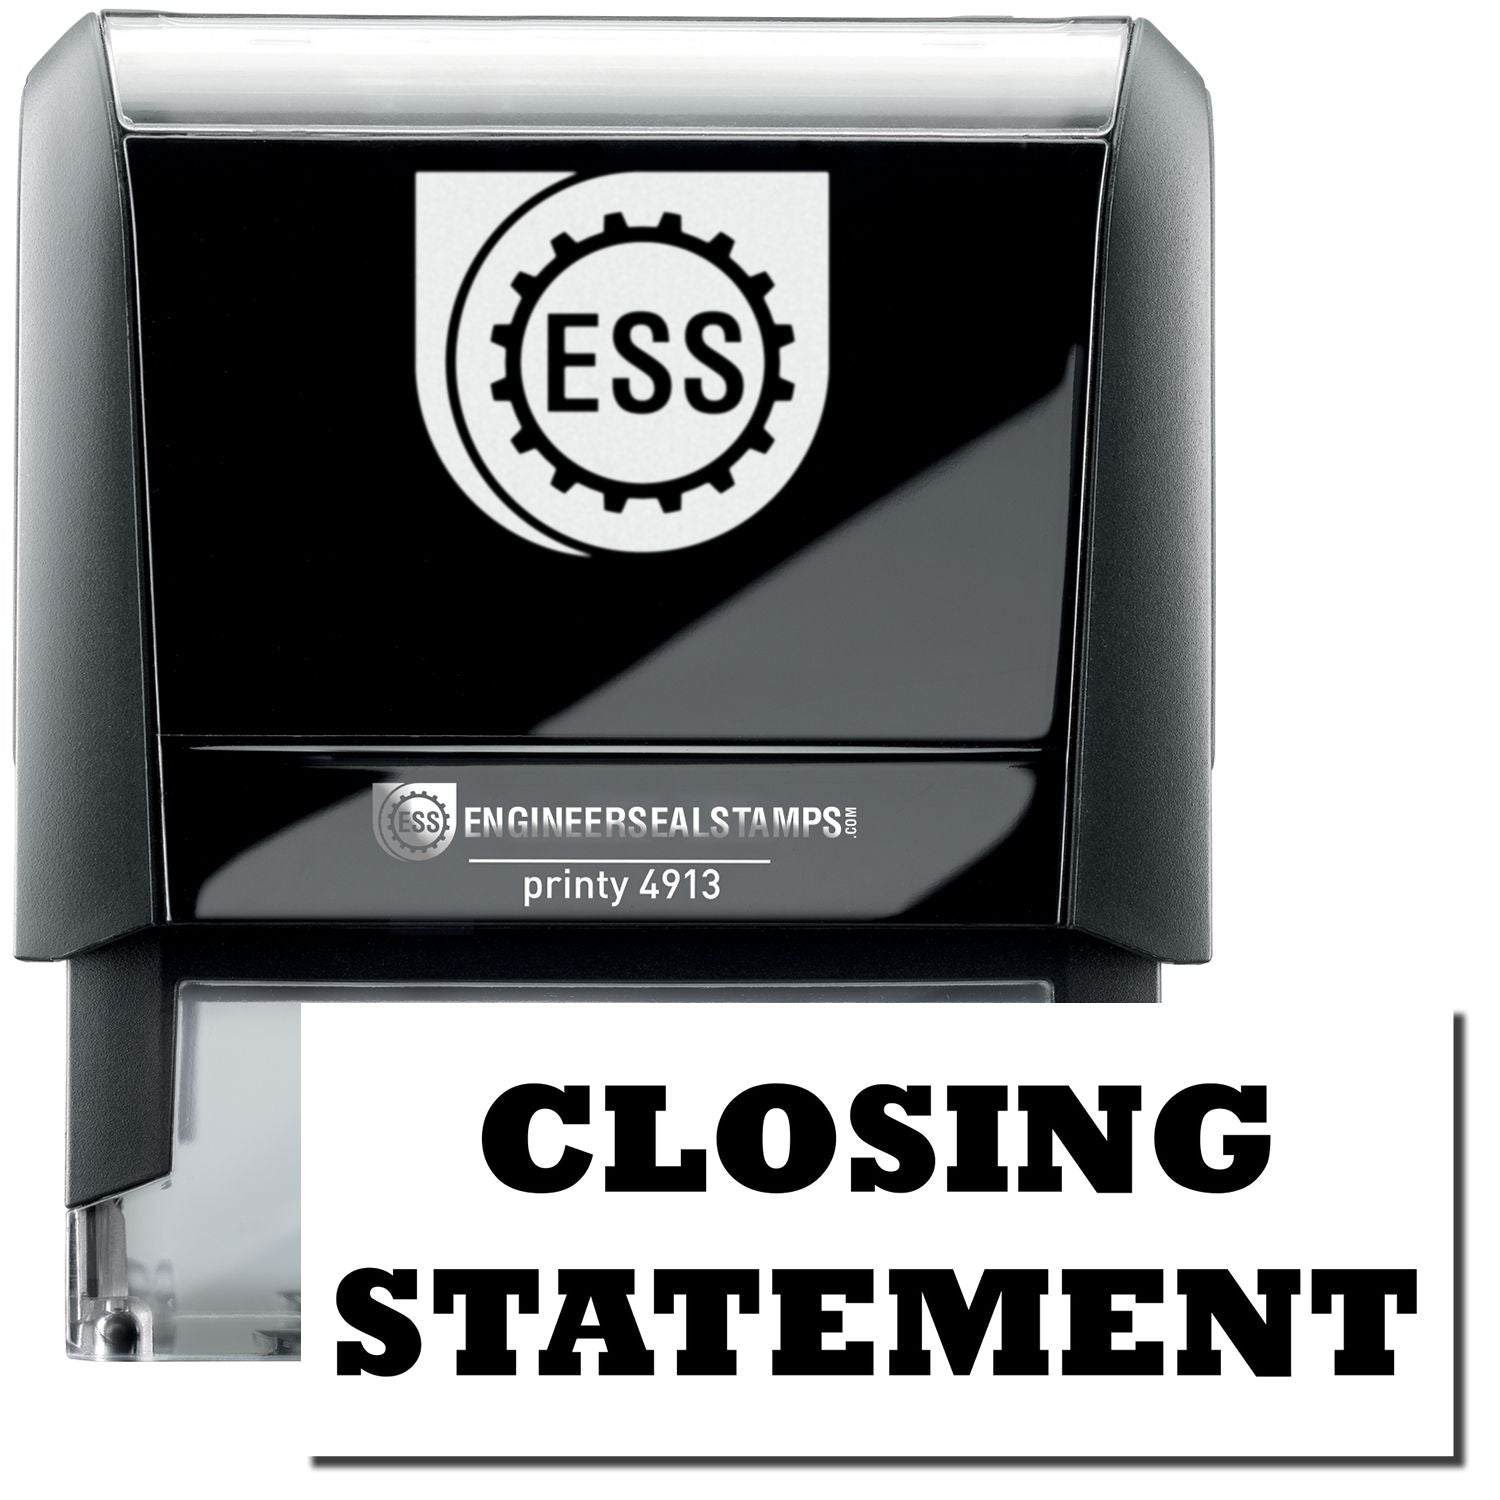 A self-inking stamp with a stamped image showing how the text "CLOSING STATEMENT" in a large bold font is displayed by it.